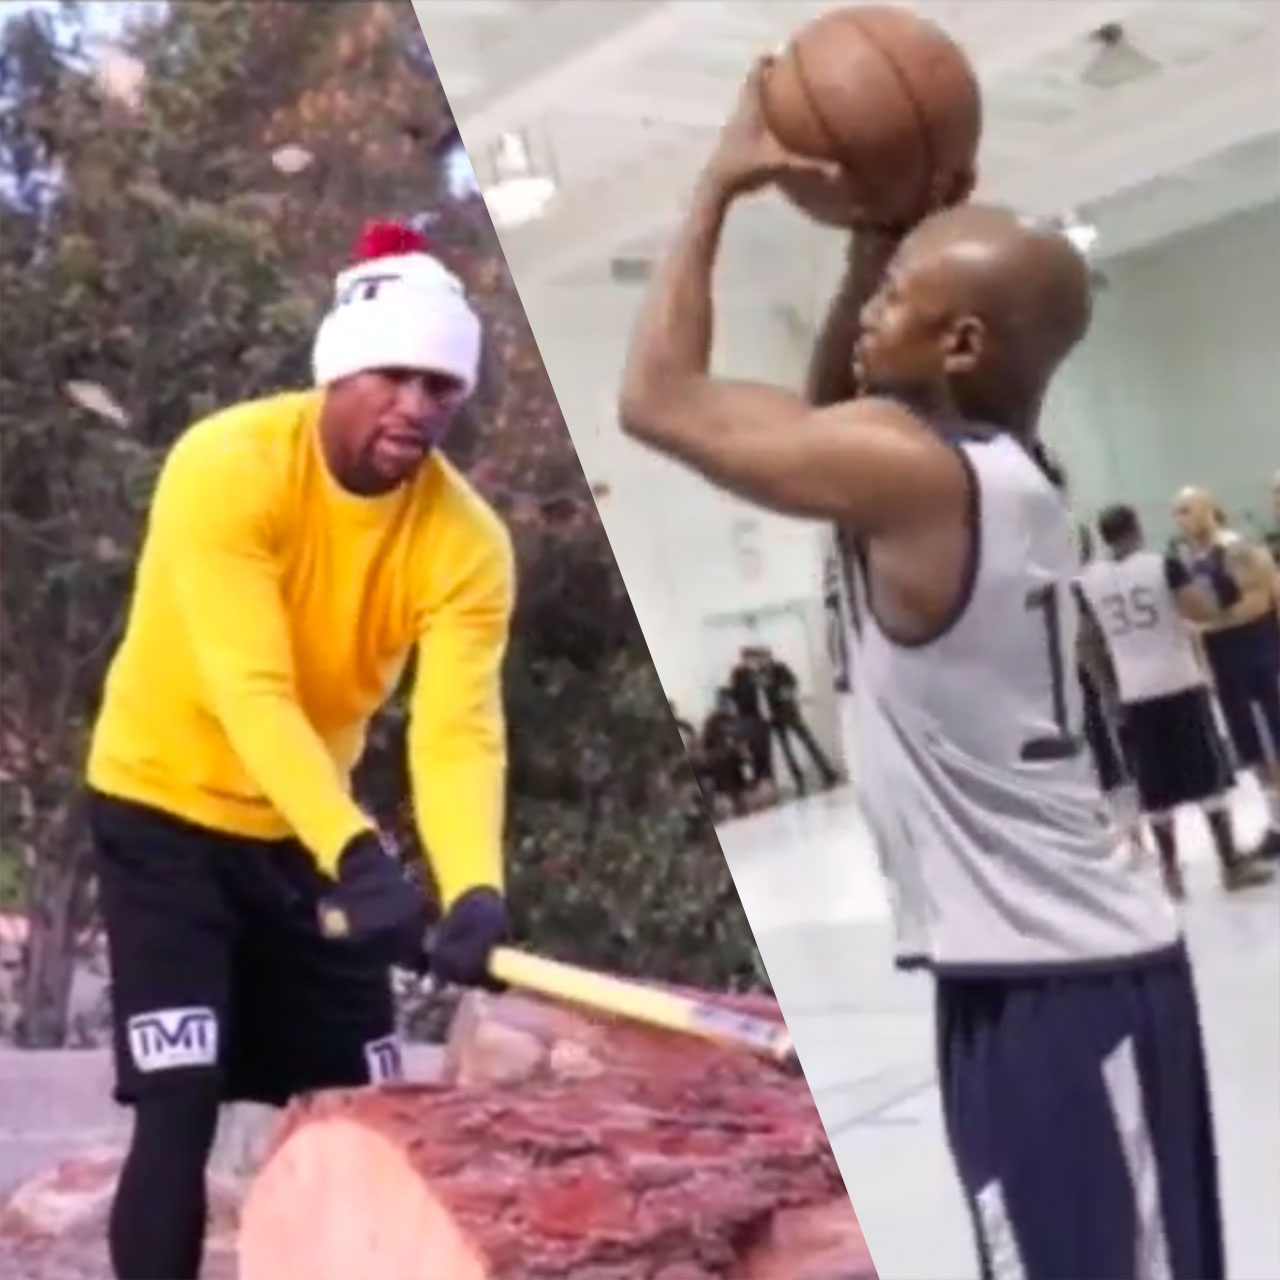 Flyod Mayweather training camp includes chopping wood and basketball